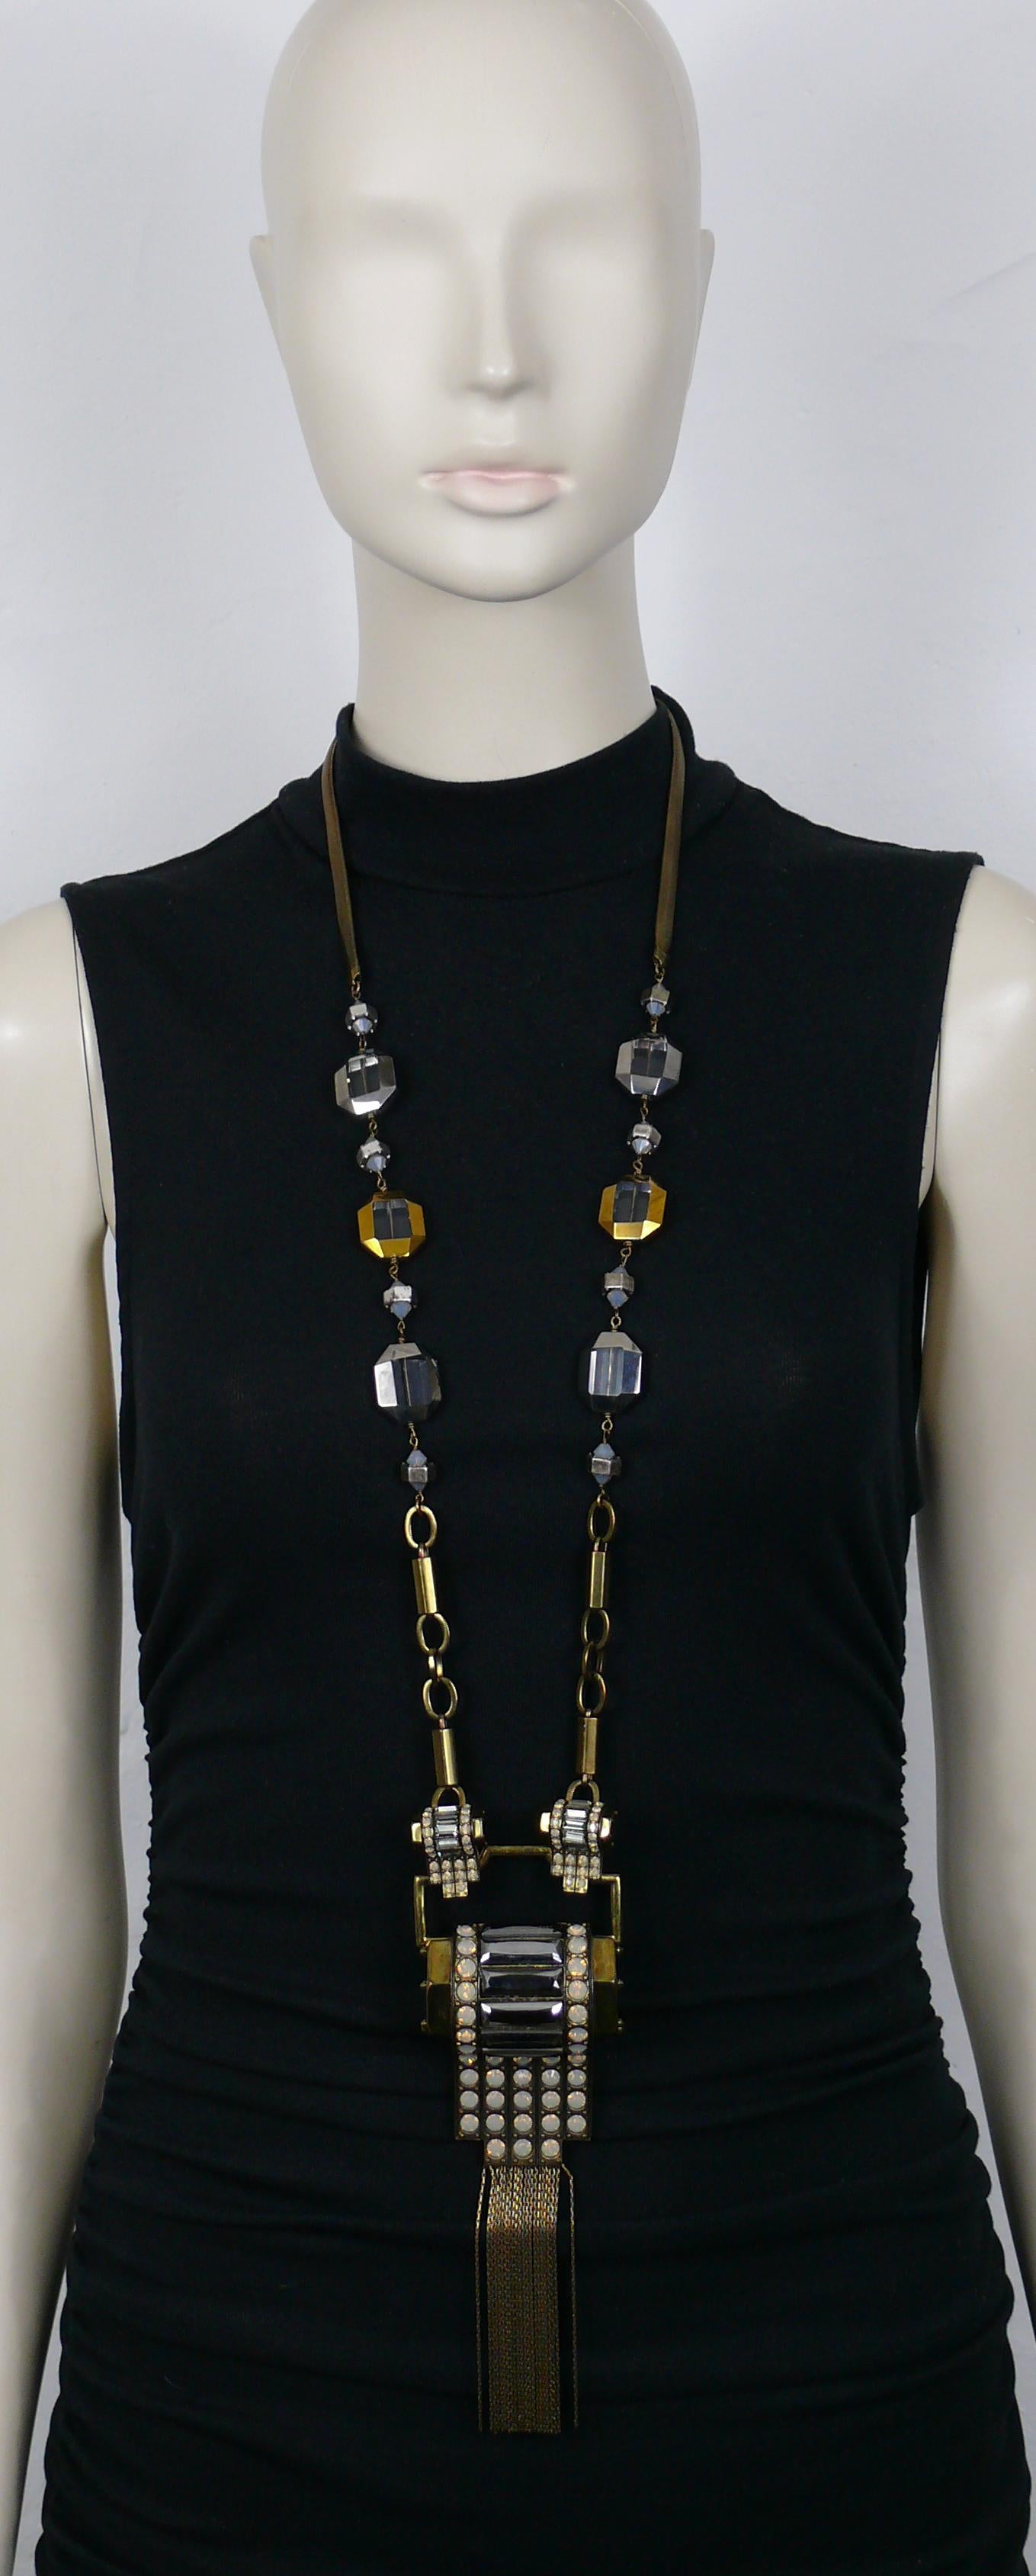 JEAN PAUL GAULTIER statement bronze tone Art Deco inspired sautoir necklace featuring glass beads and a massive pendant with chain tassel embellished with light grey opal color crystals.

Box clasp closure with crystal embellishement.

Embossed JEAN